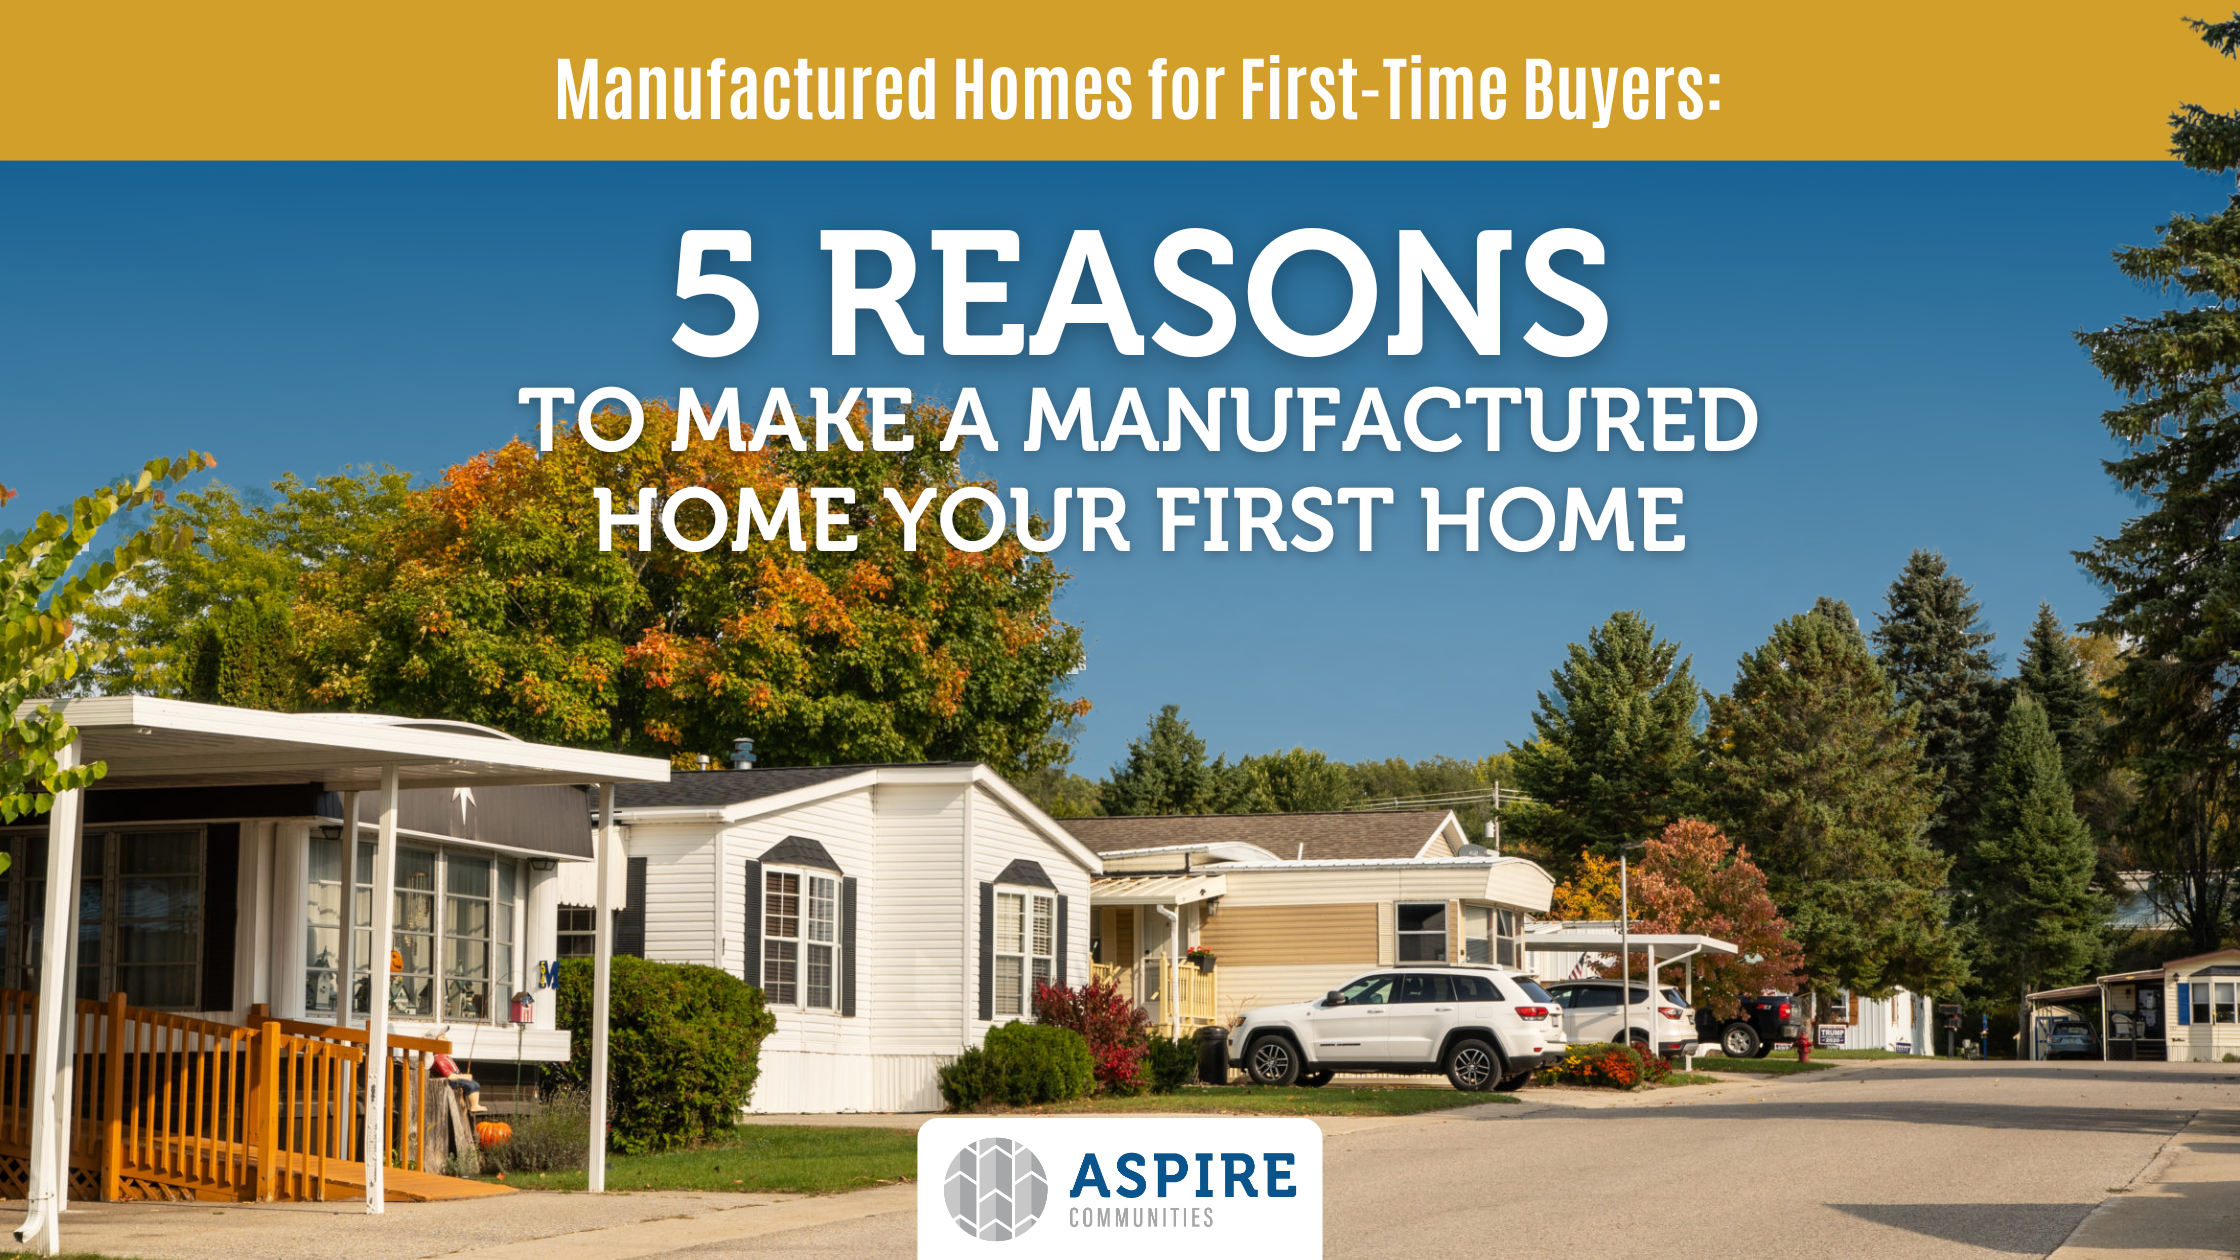 Manufactured homes for first-time buyers